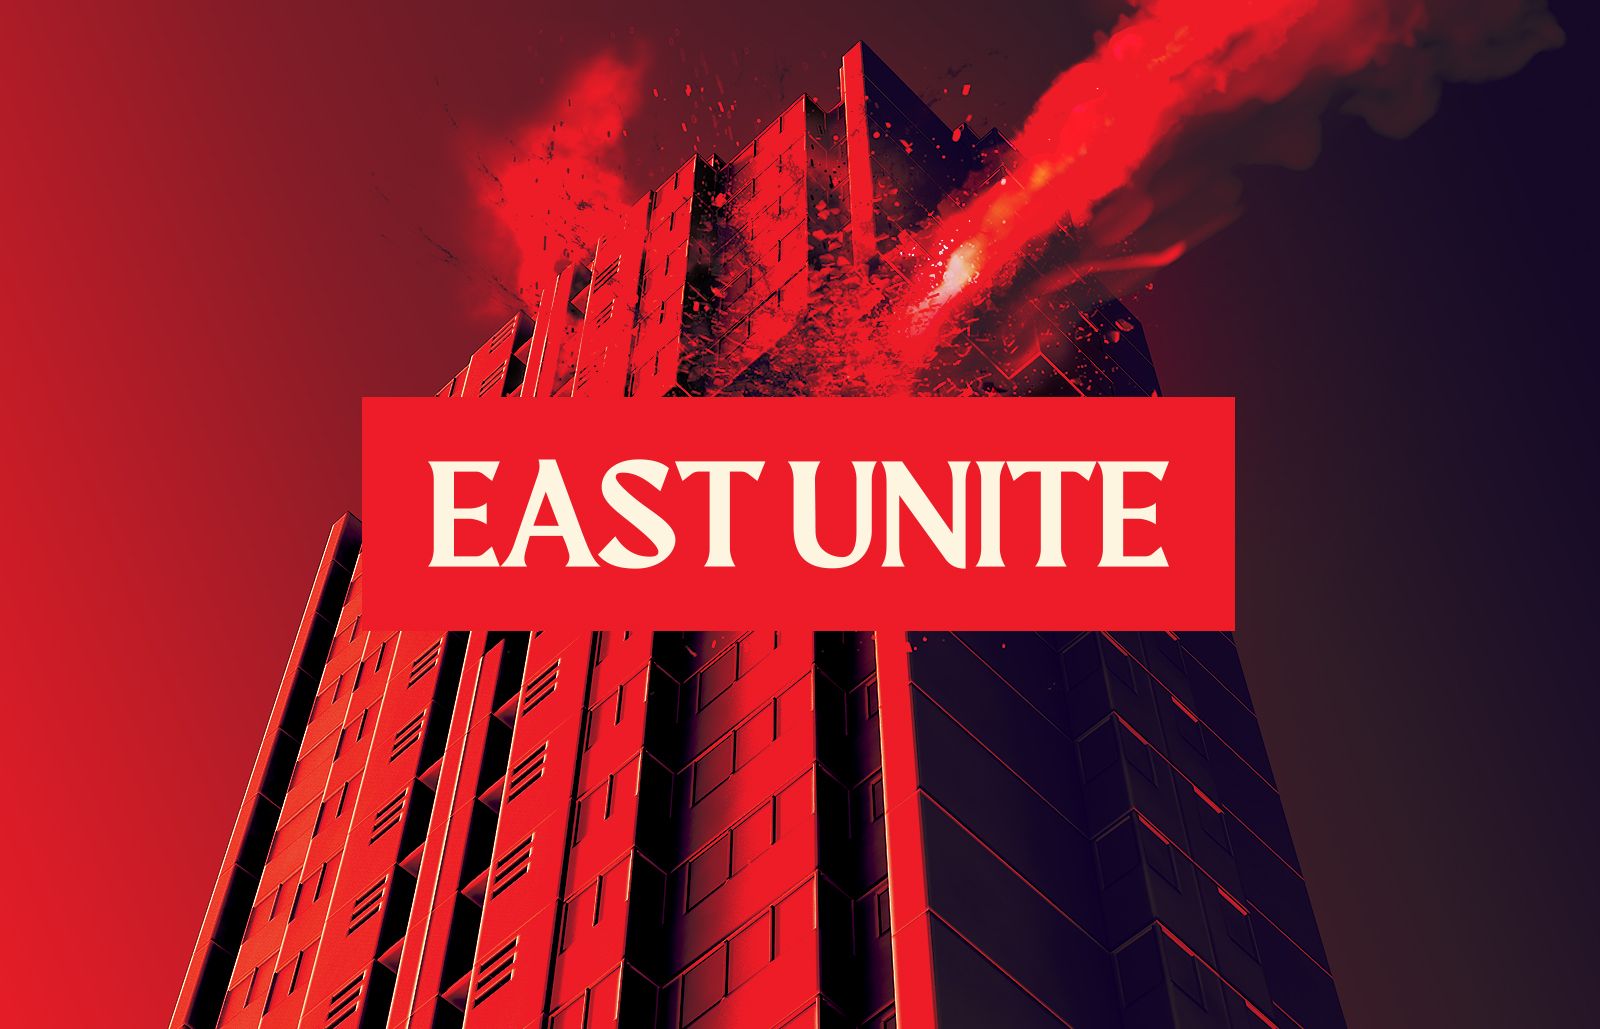 Our answer: EAST UNITE